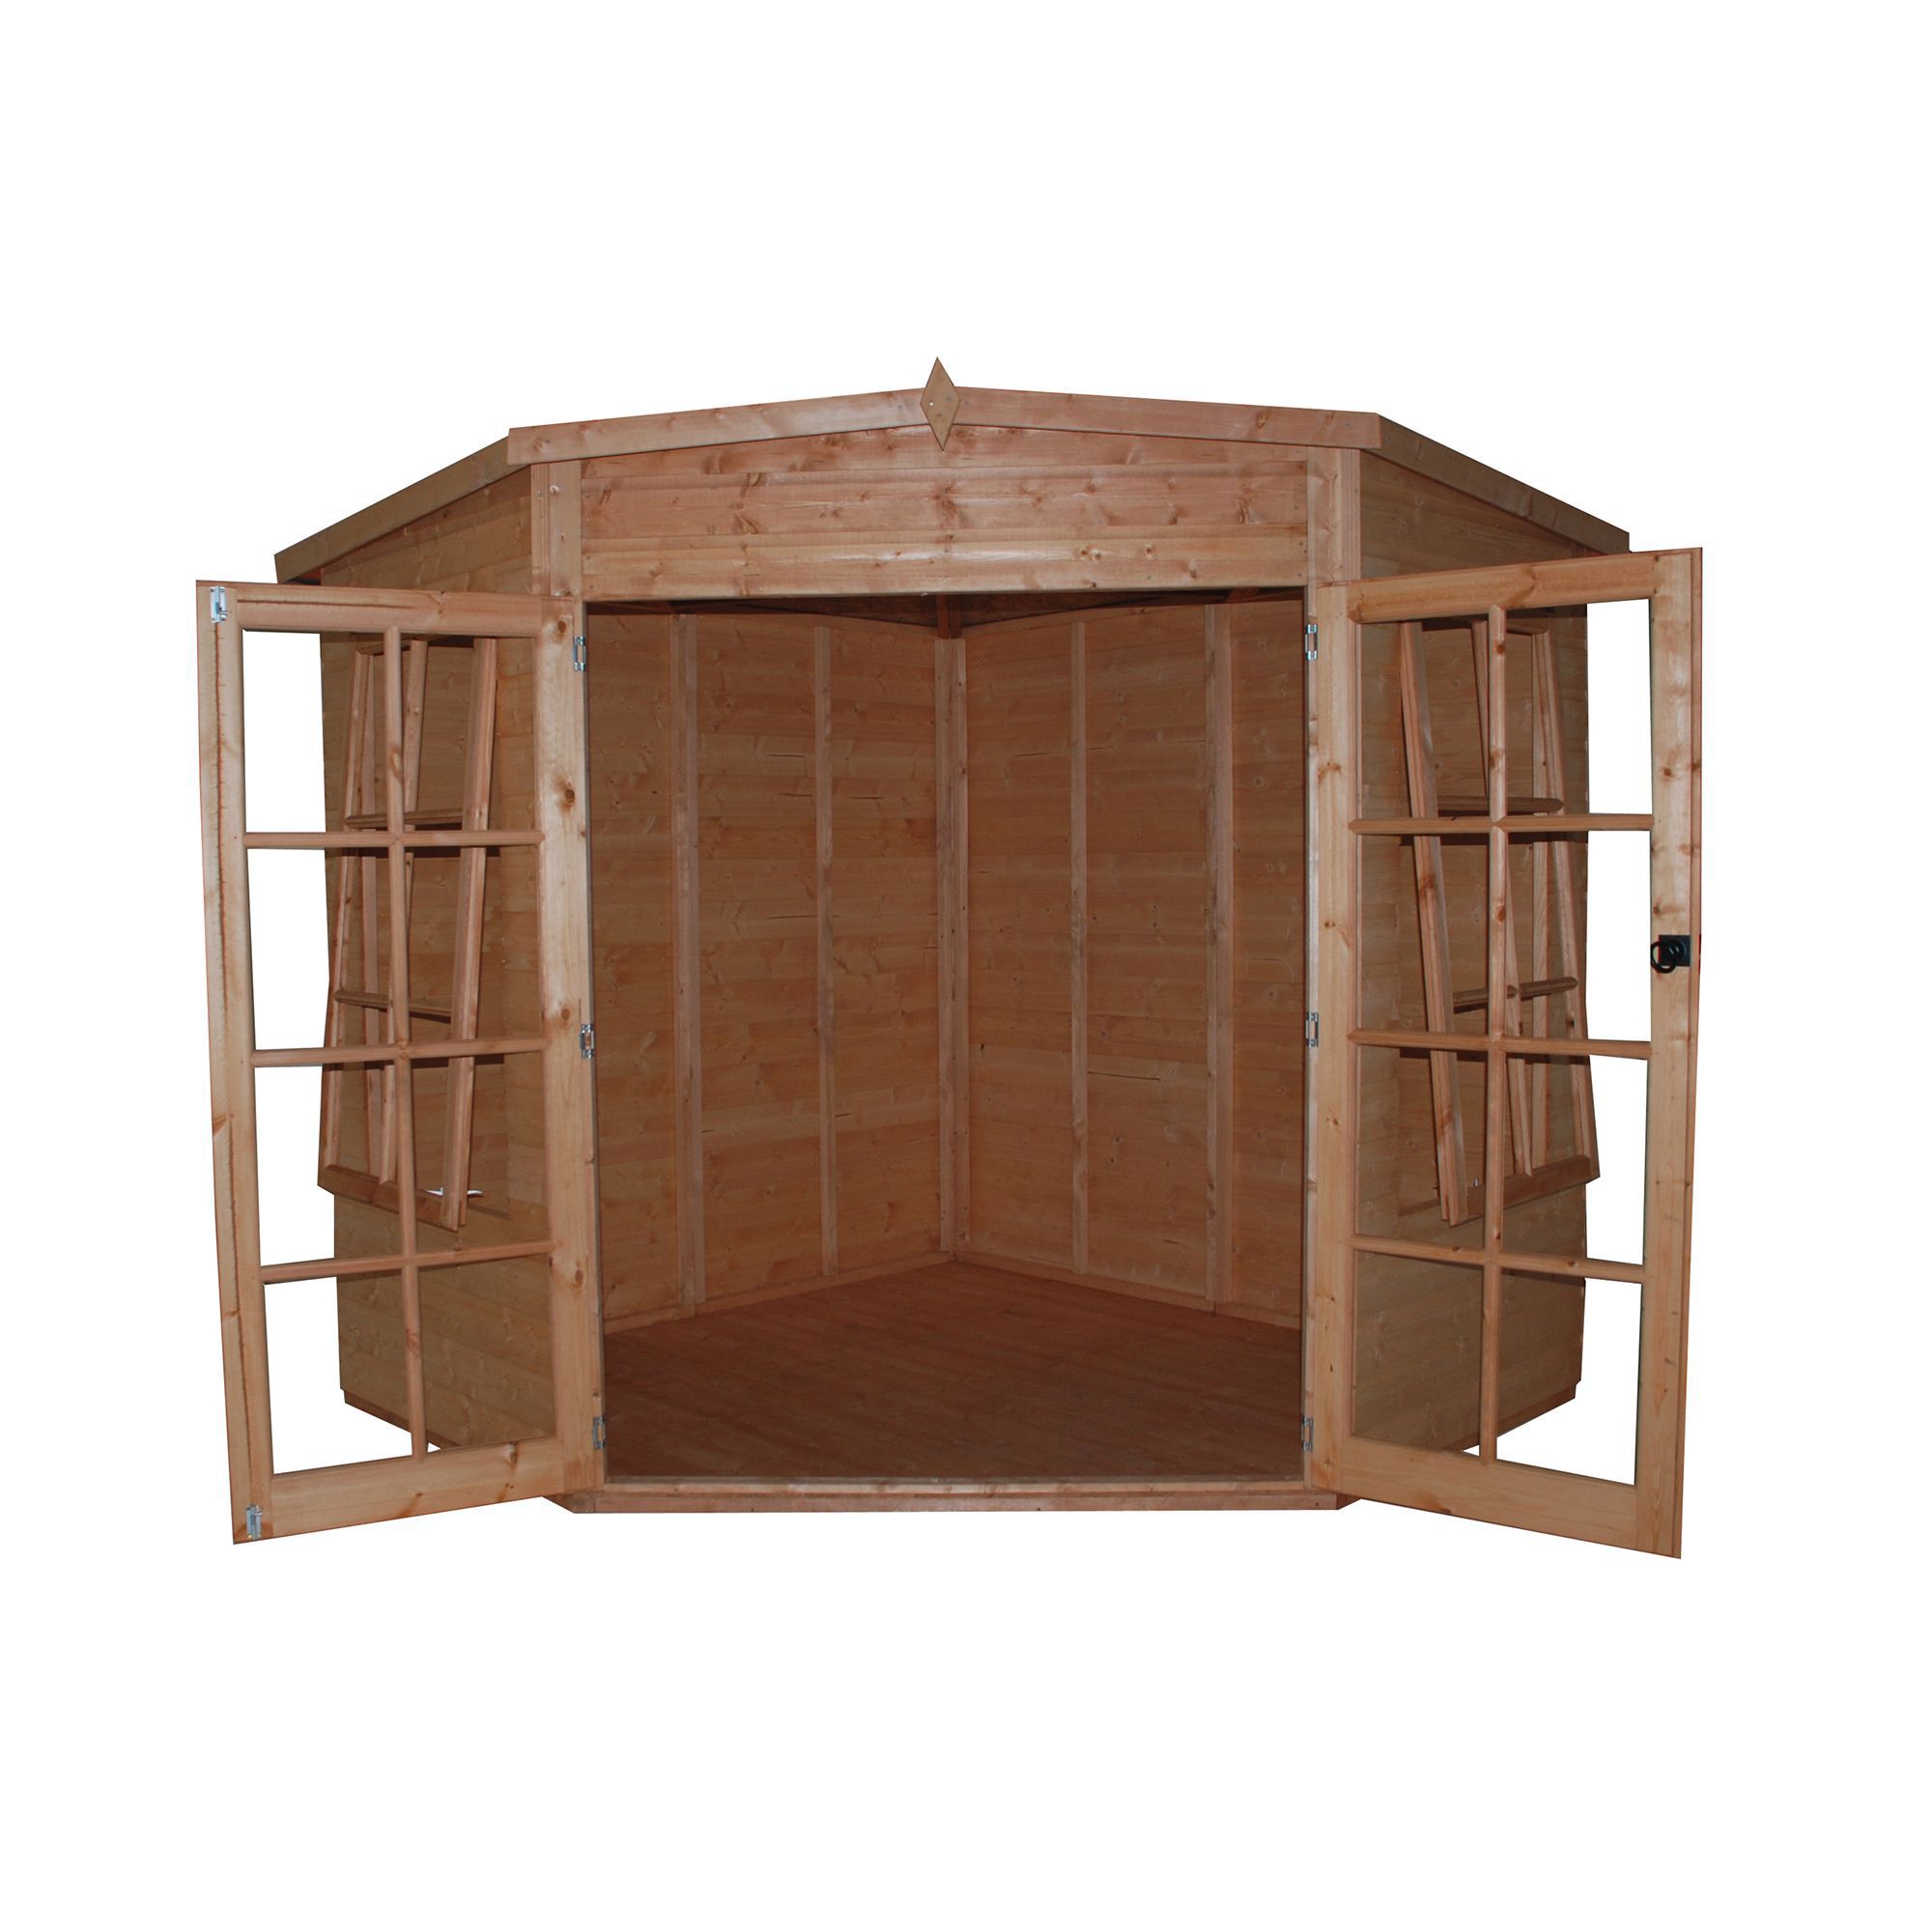 Shire Hampton 10x10 ft Pent Wooden Summer house - Assembly service included